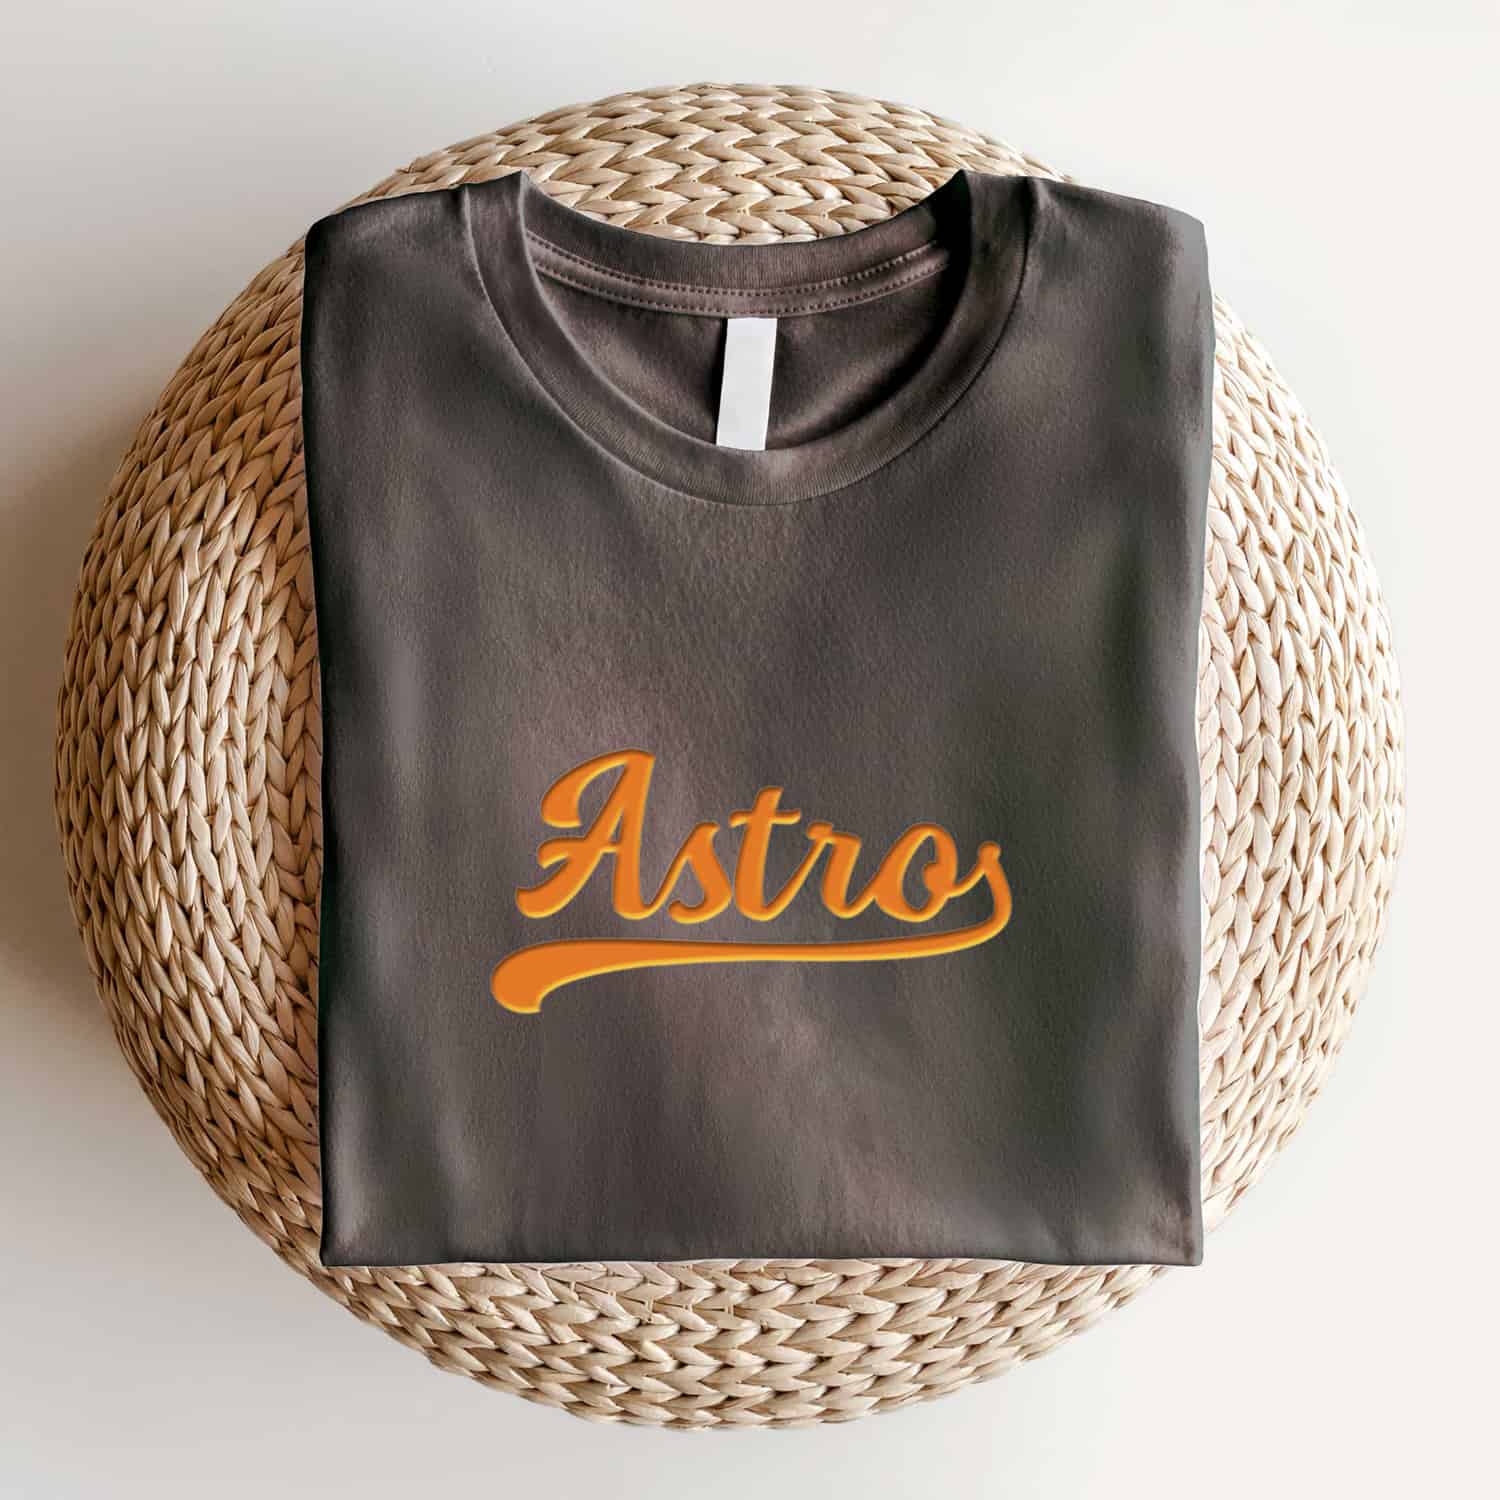 Astros Shirt God Found Loudest Women Made Them Astros Mom Houston Astros  Gift - Personalized Gifts: Family, Sports, Occasions, Trending